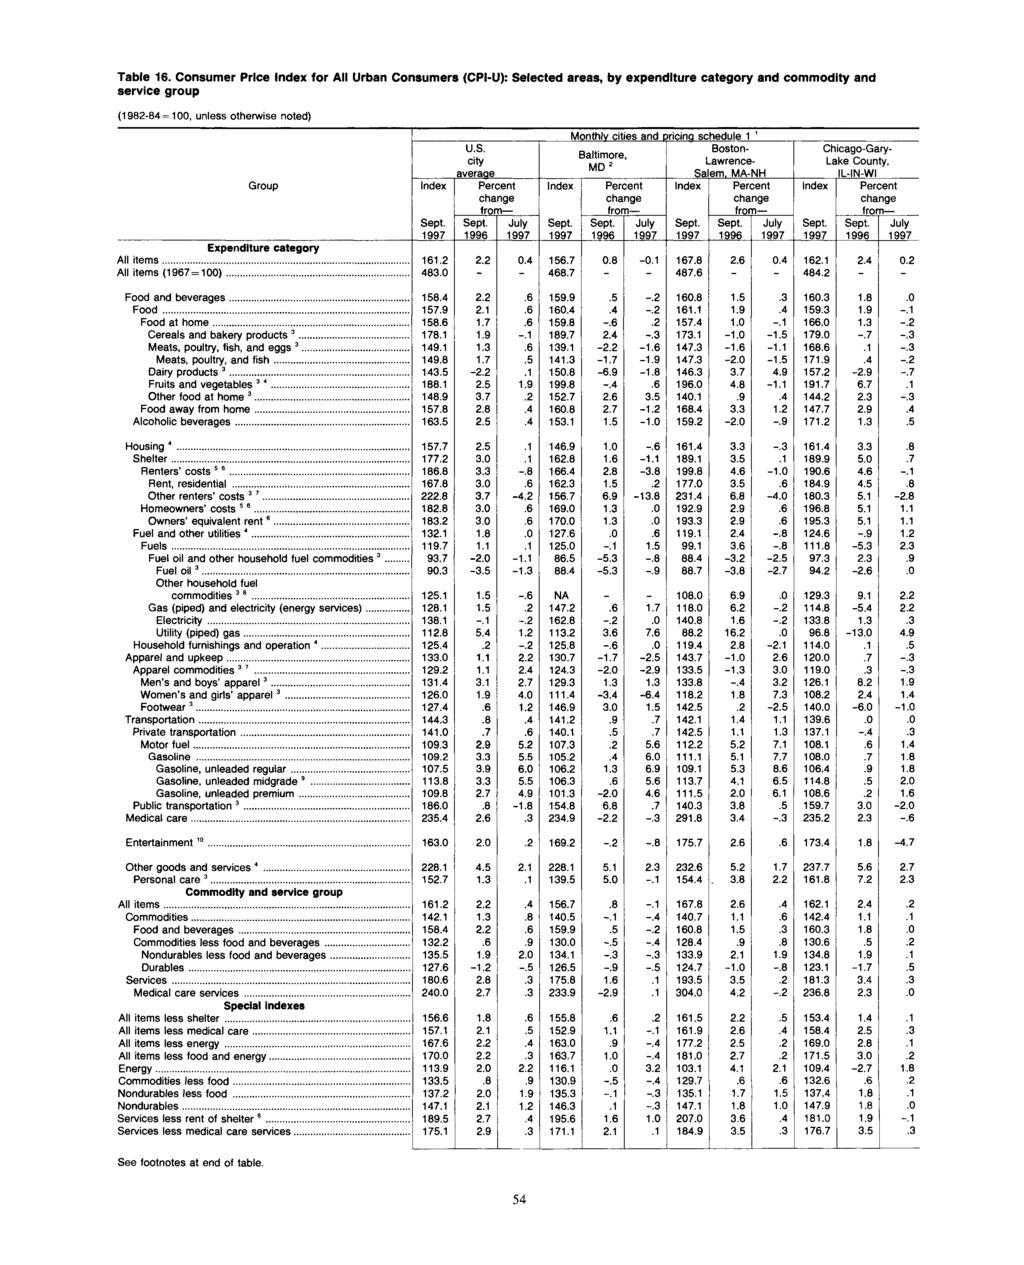 Table 16. Consumer Price for AH Urban Consumers (CPI-U): Selected areas, by expenditure category and commodity and service group (1982-84 = 100, unless otherwise noted) U.S. city average Group Monthly cities and pricing schedule 1 1 Boston- Baltimore, L.